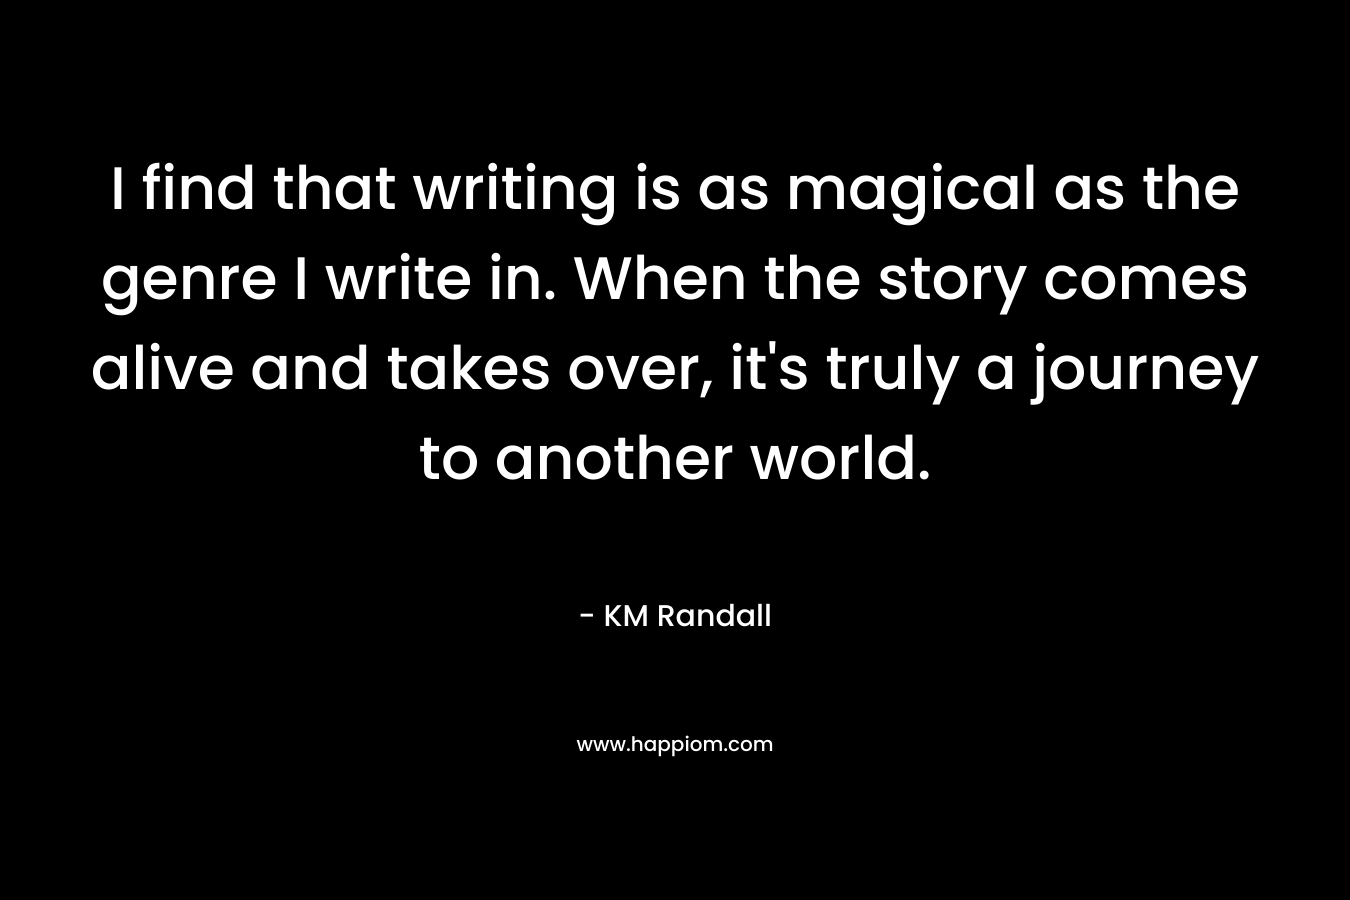 I find that writing is as magical as the genre I write in. When the story comes alive and takes over, it's truly a journey to another world.